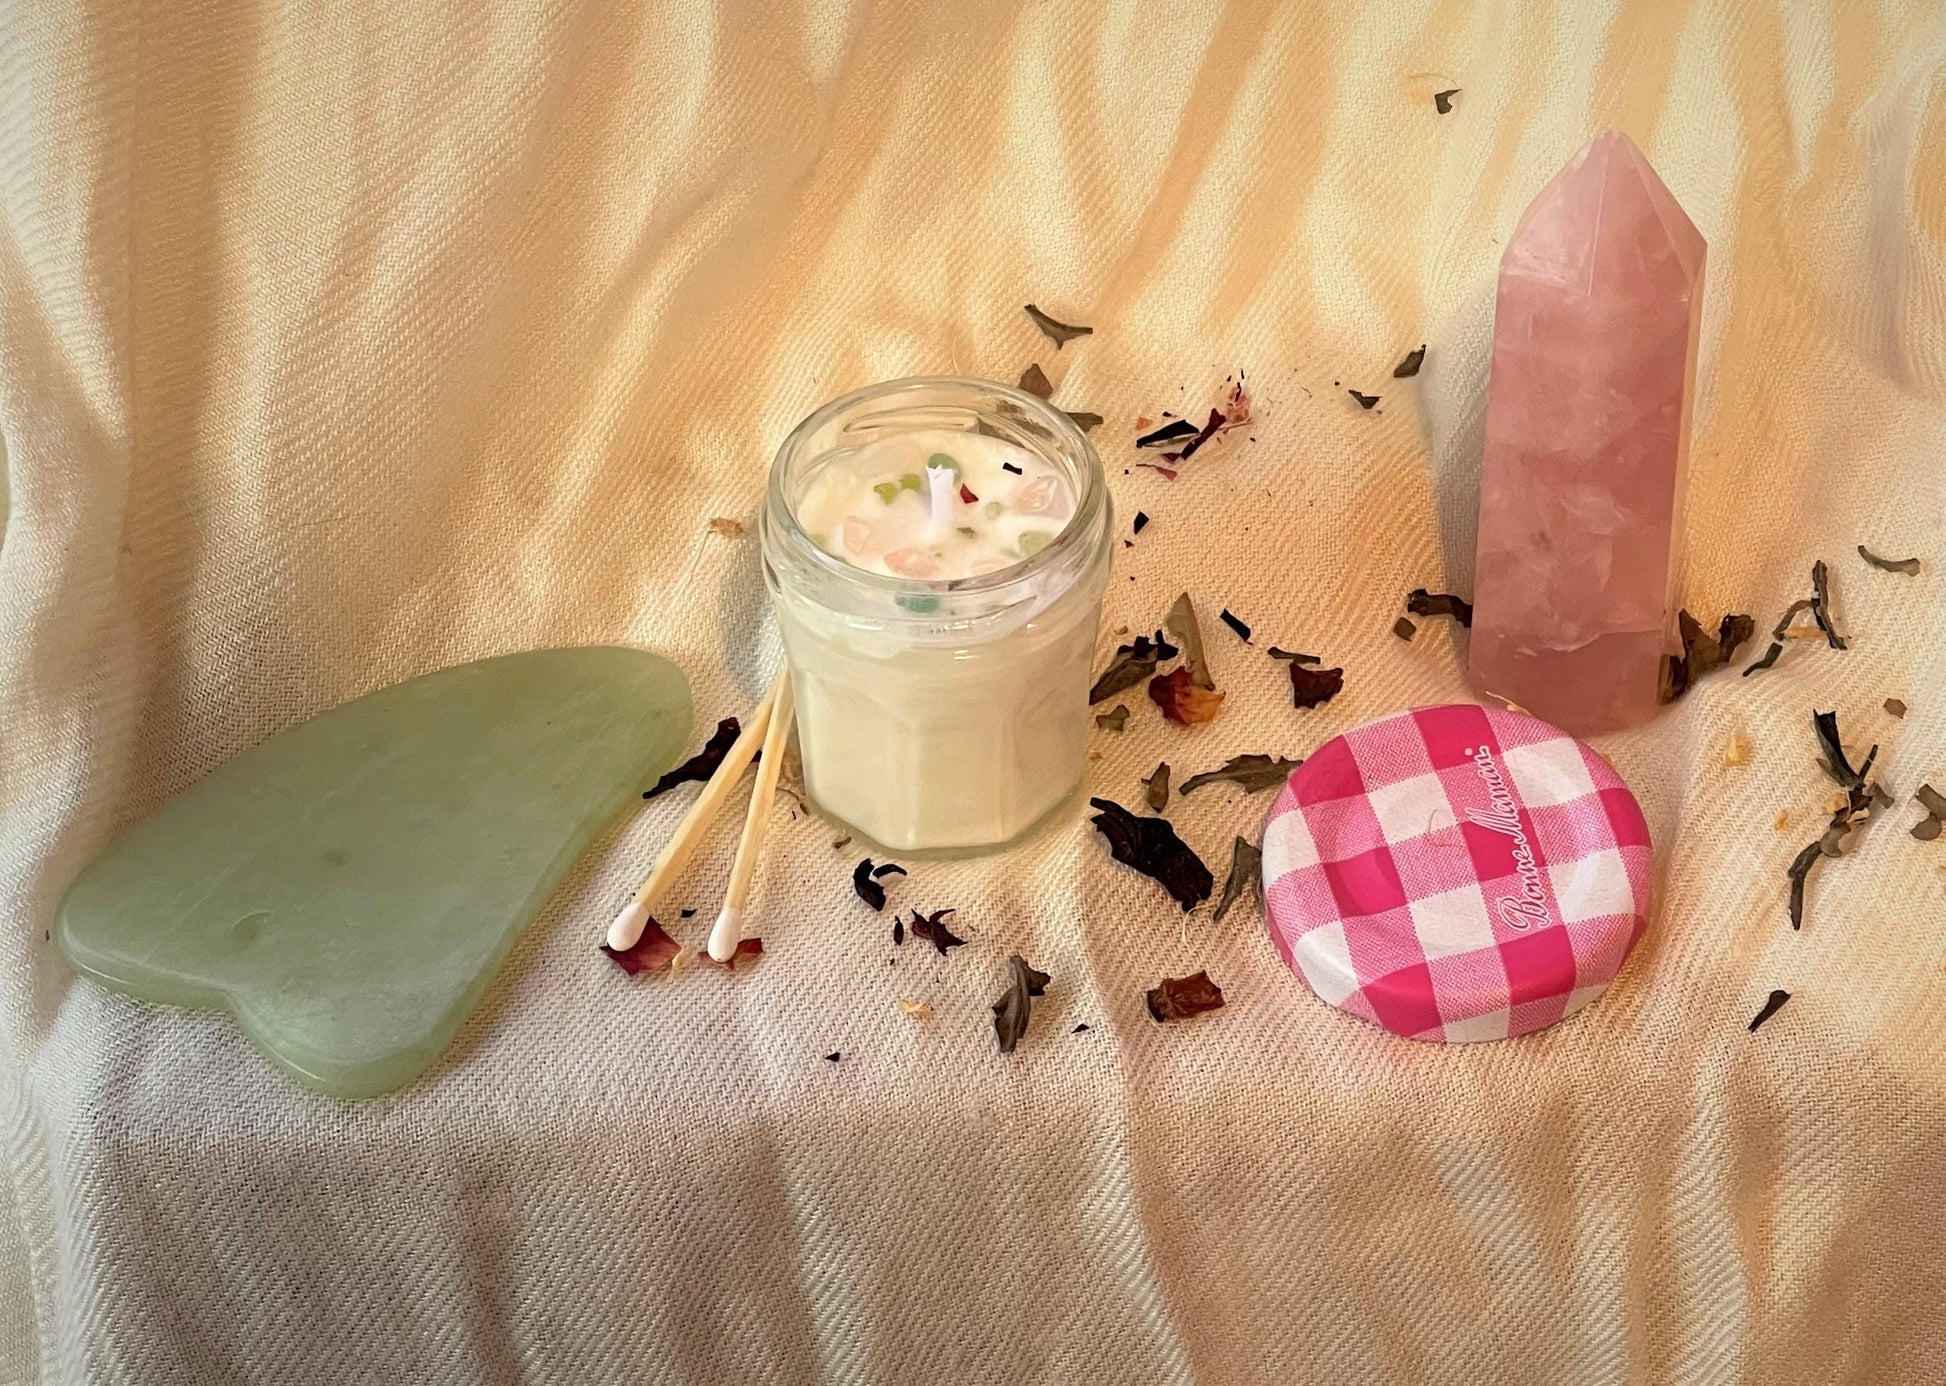 A mini jam jar candle topped with pink and green crystal chips sits centered in a silky white background. To the left, there is a green jade gua sha tool and two white matches. To the right, there is a rose quartz tower and the pink gingham candle lid. Dried tea leaves and rose petals are scattered among everything.